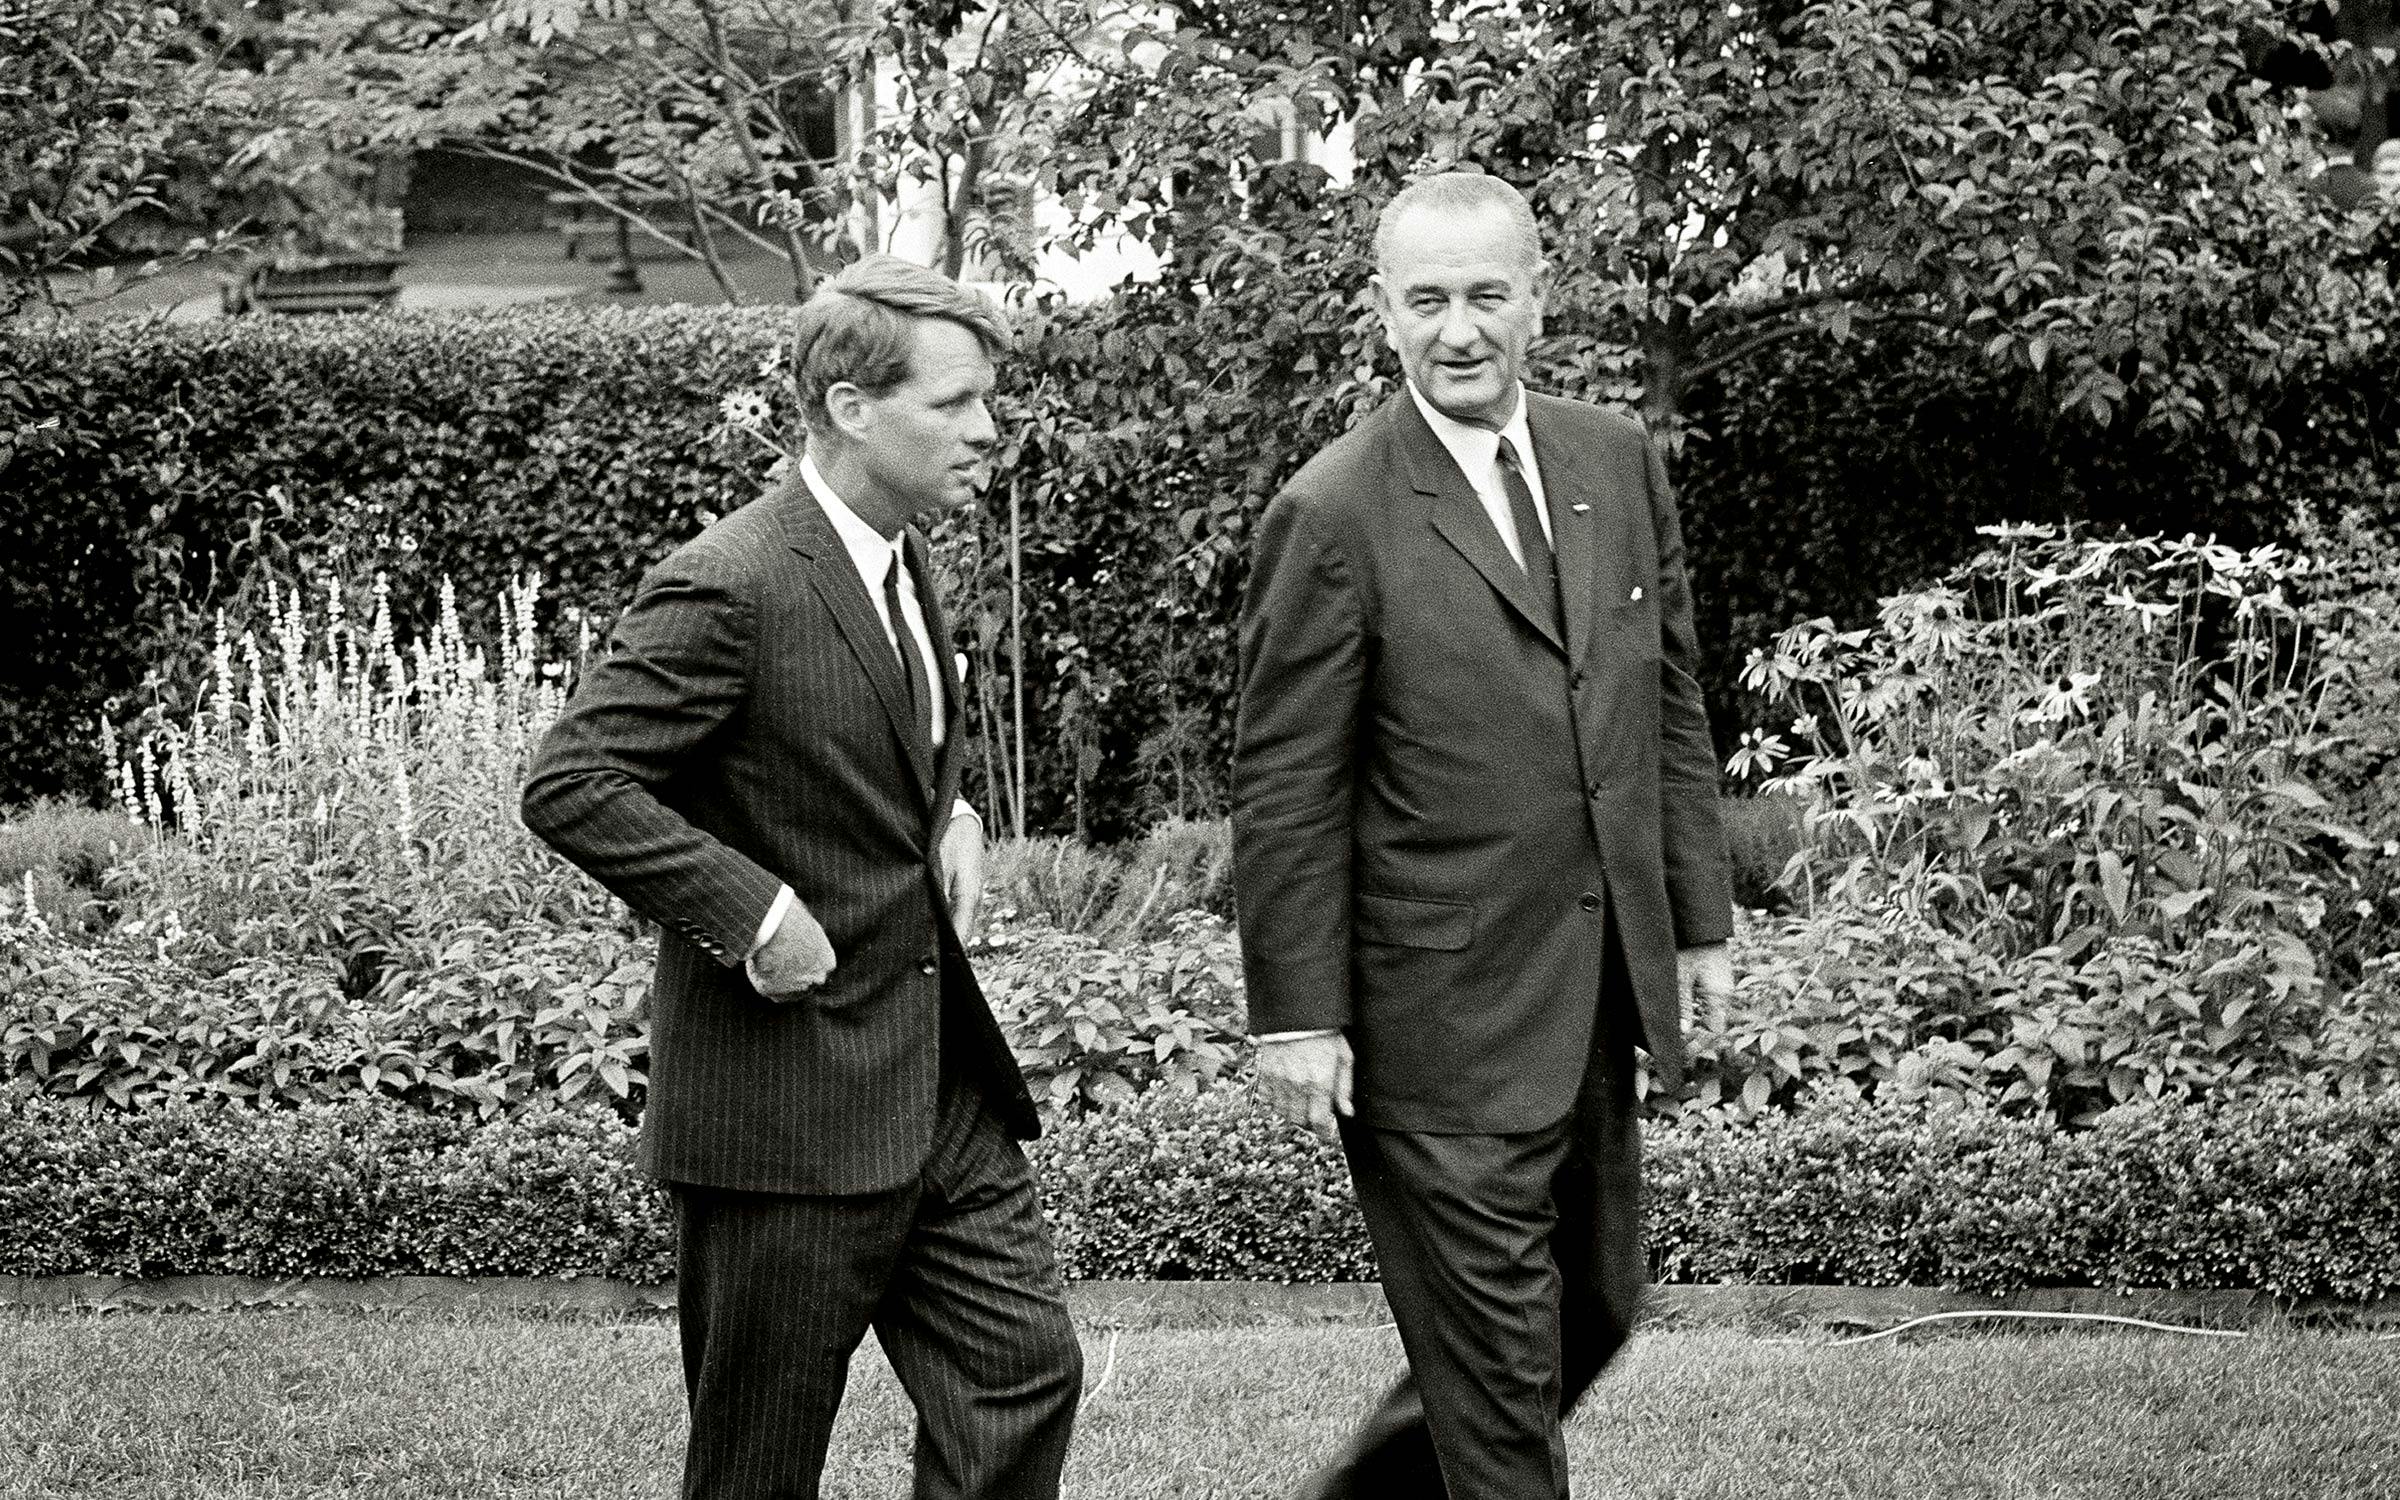 Robert F. Kennedy and Lyndon B. Johnson on the White House lawn. 